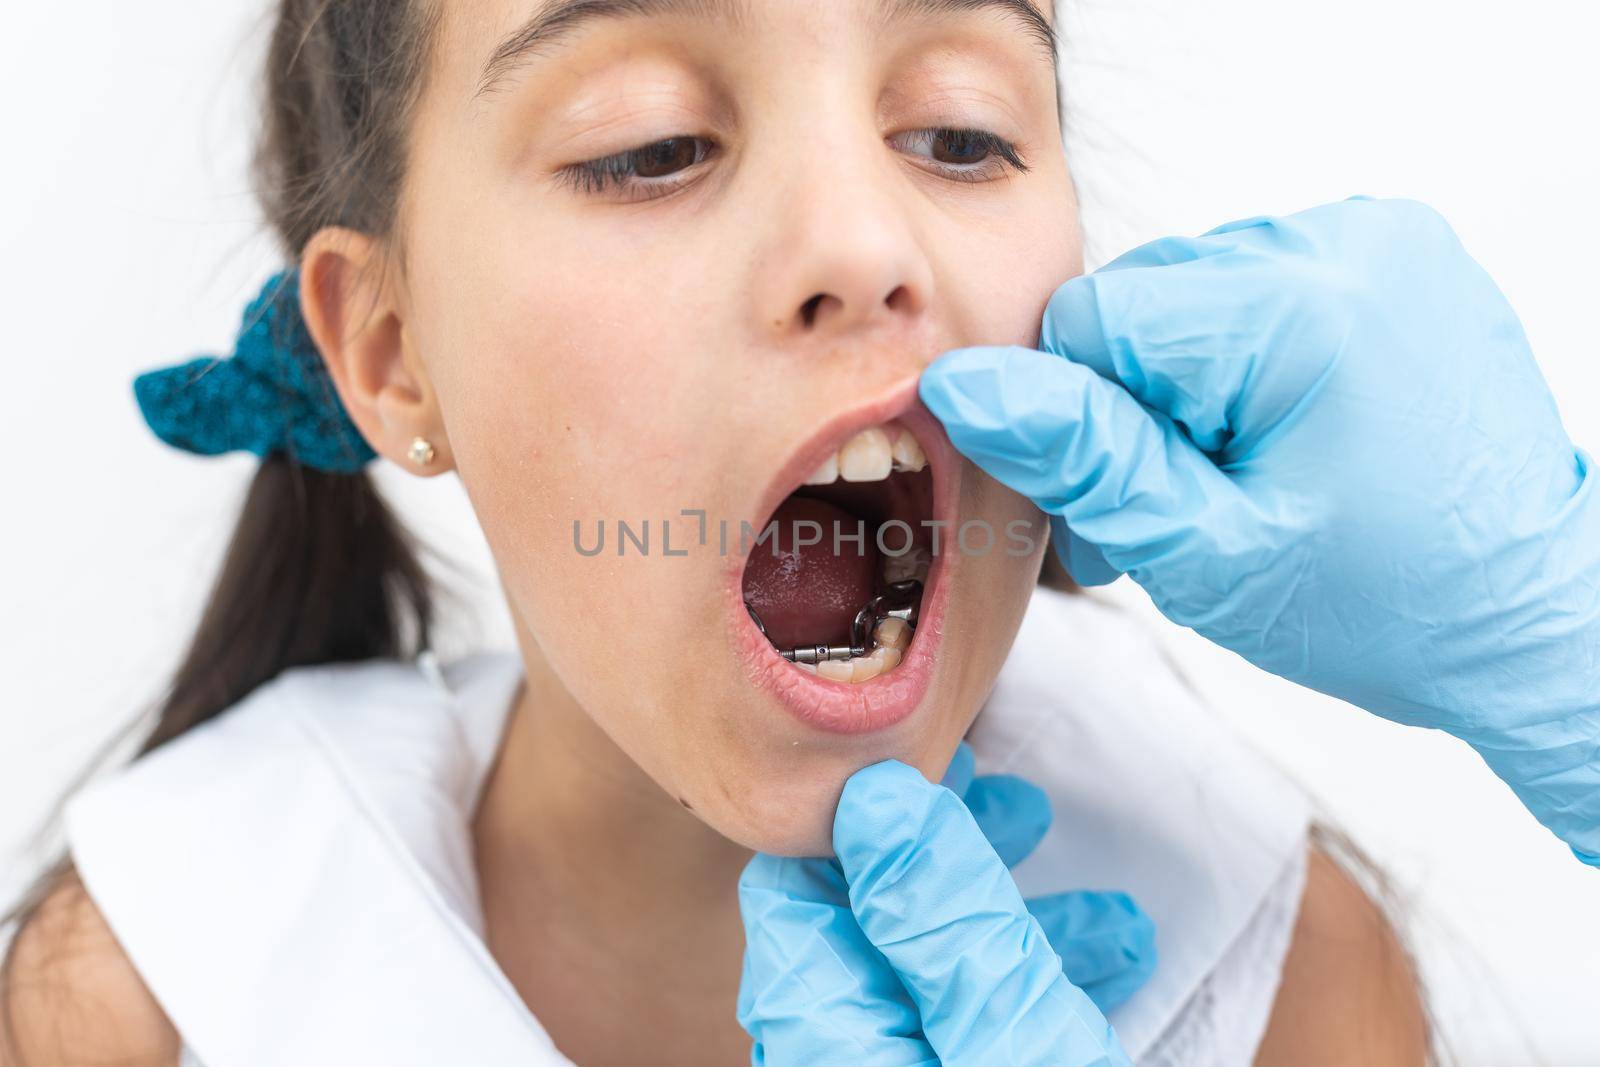 Cropped view of the little girl having her plates checked. Close-up portrait of smiling teenage girl with teeth plates against dentist sitting in clinic. Girl with plates being examined by dentist.